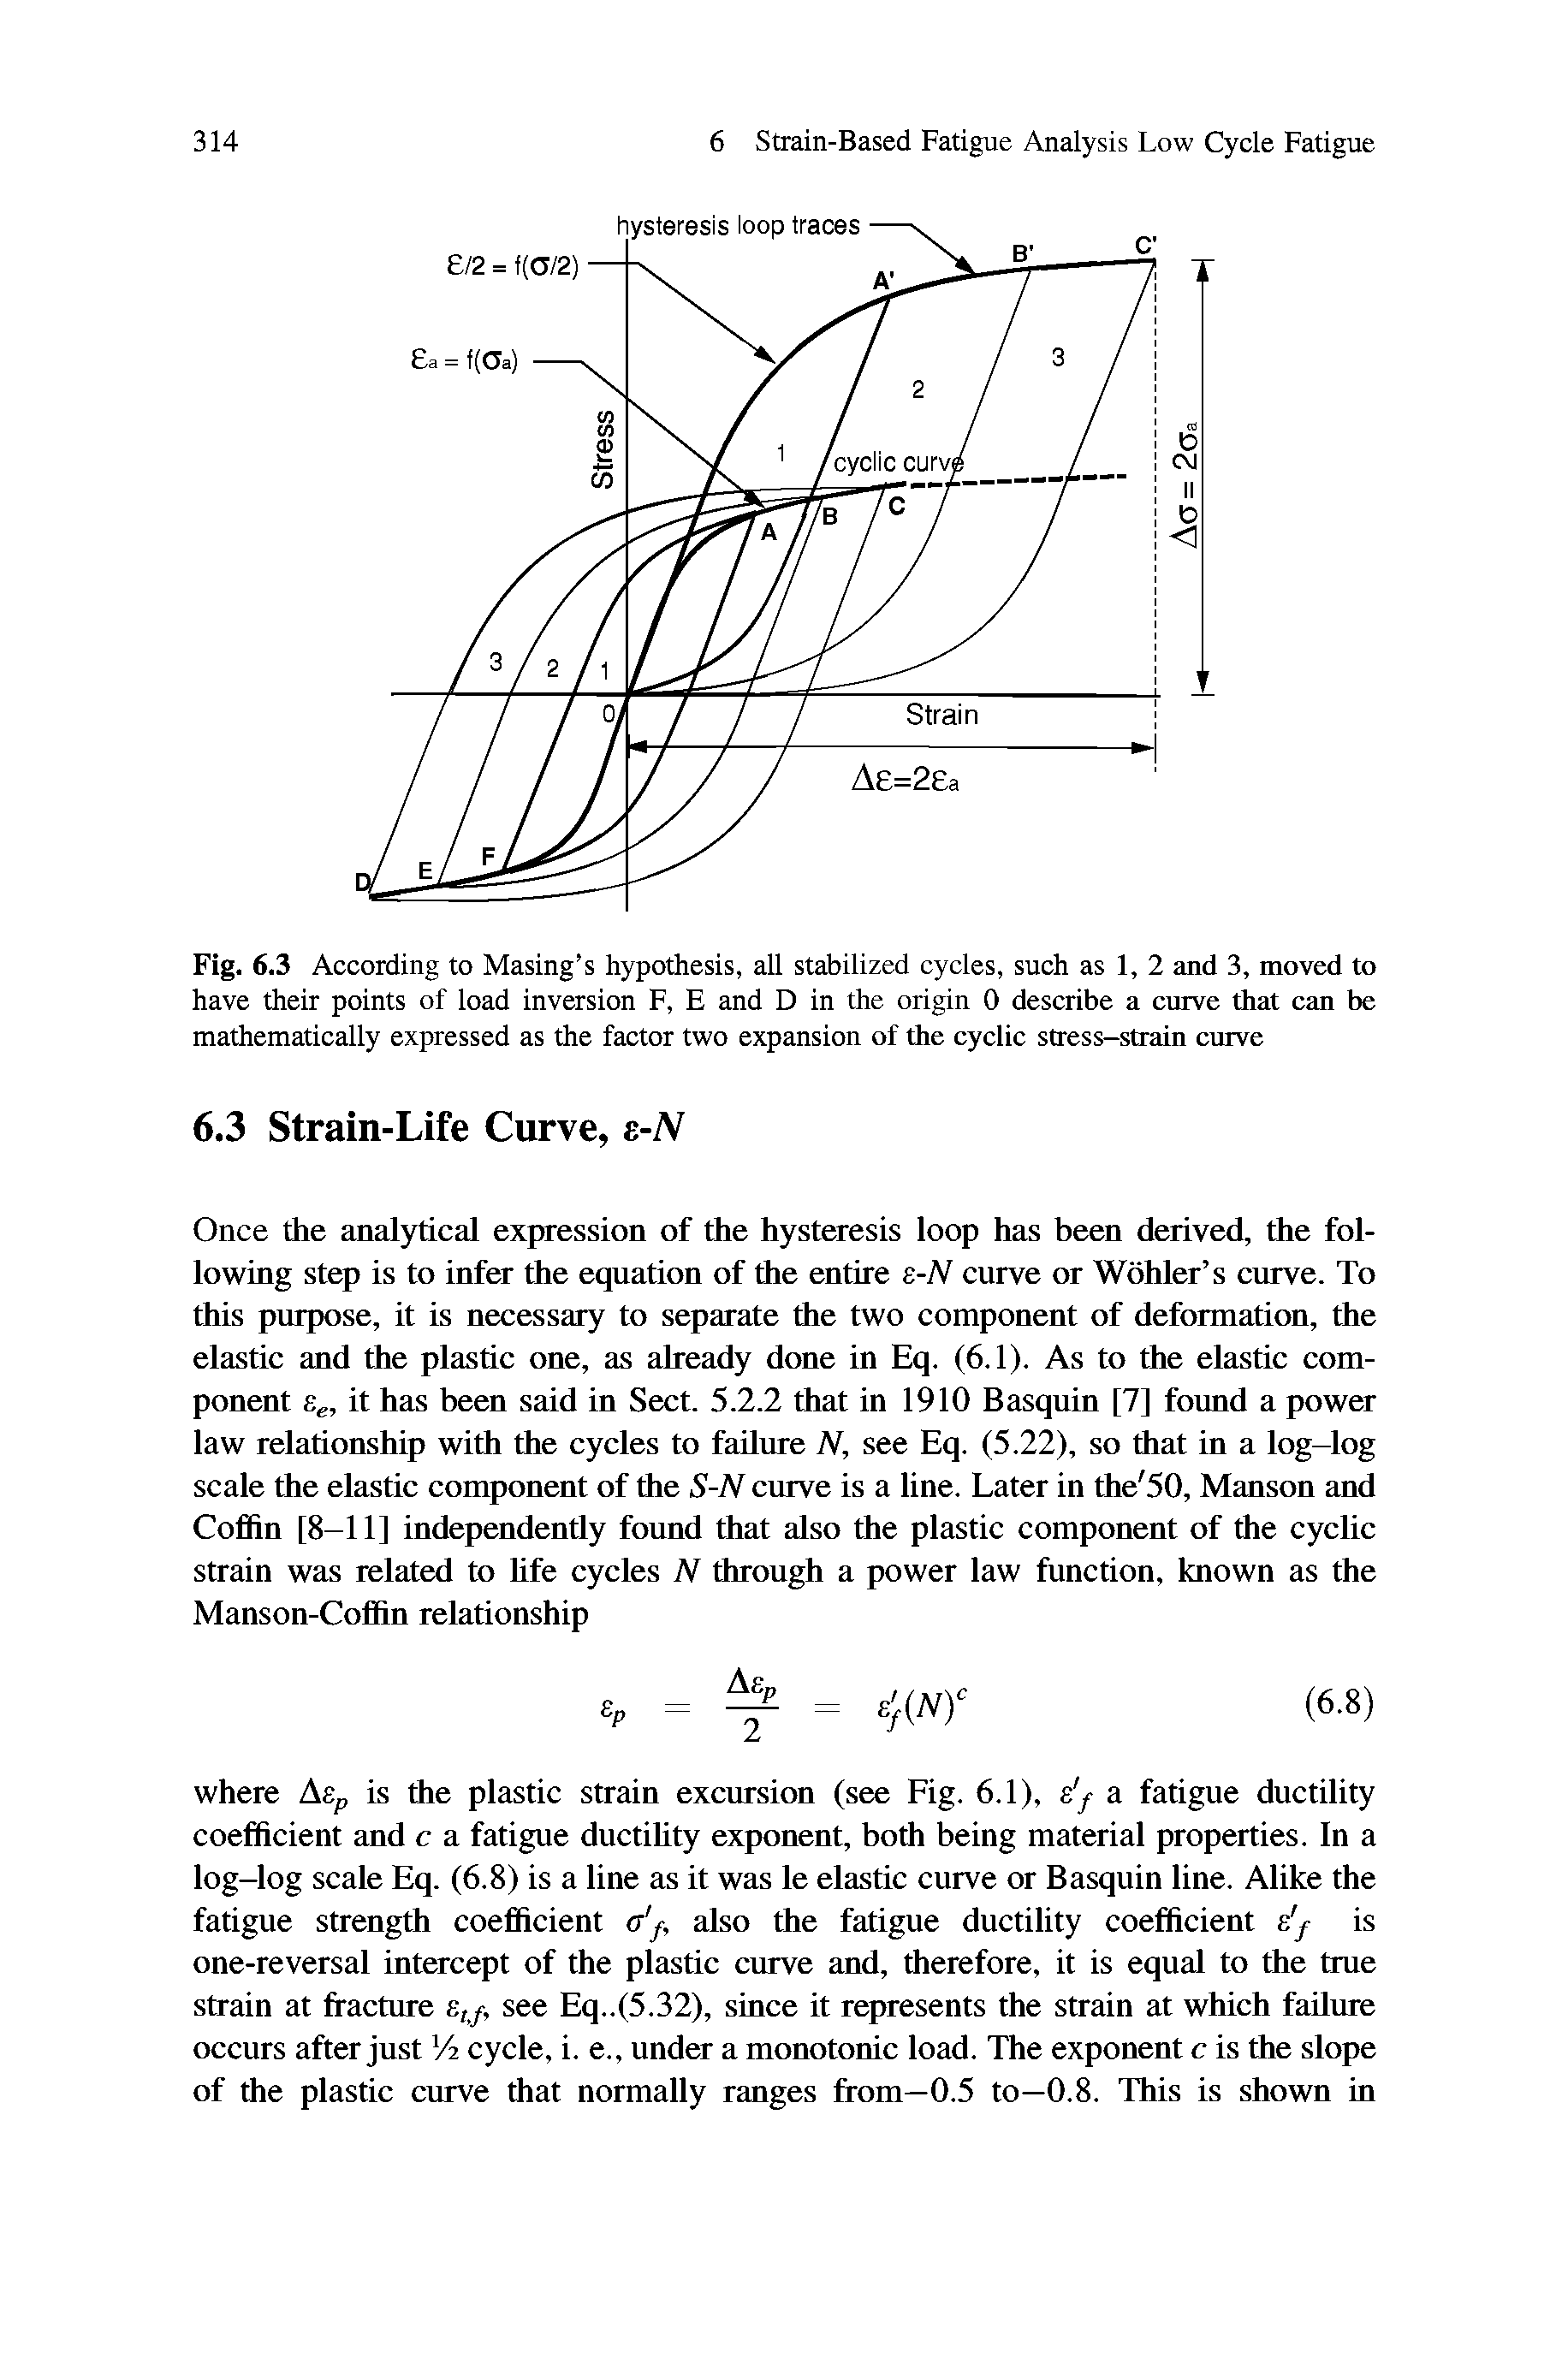 Fig. 6.3 According to Masing s hypothesis, all stabilized cycles, such as 1, 2 and 3, moved to have their points of load inversion F, E and D in the origin 0 describe a curve that can be mathematically expressed as the factor two expansion of the cyclic stress-strain curve...